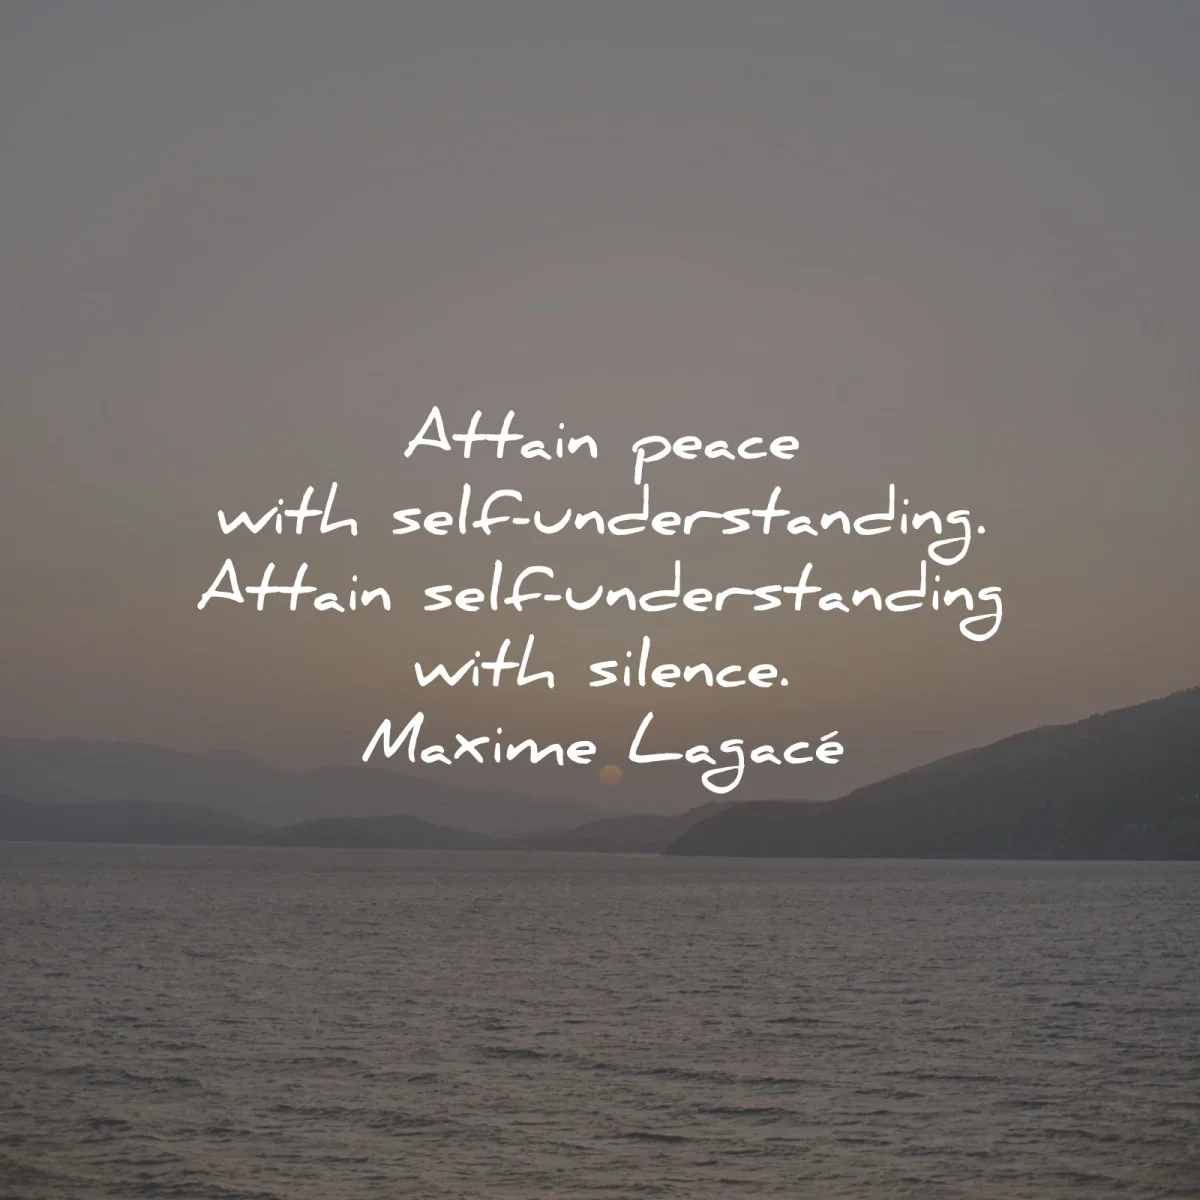 silence quotes attain peace self understanding maxime lagace wisdom